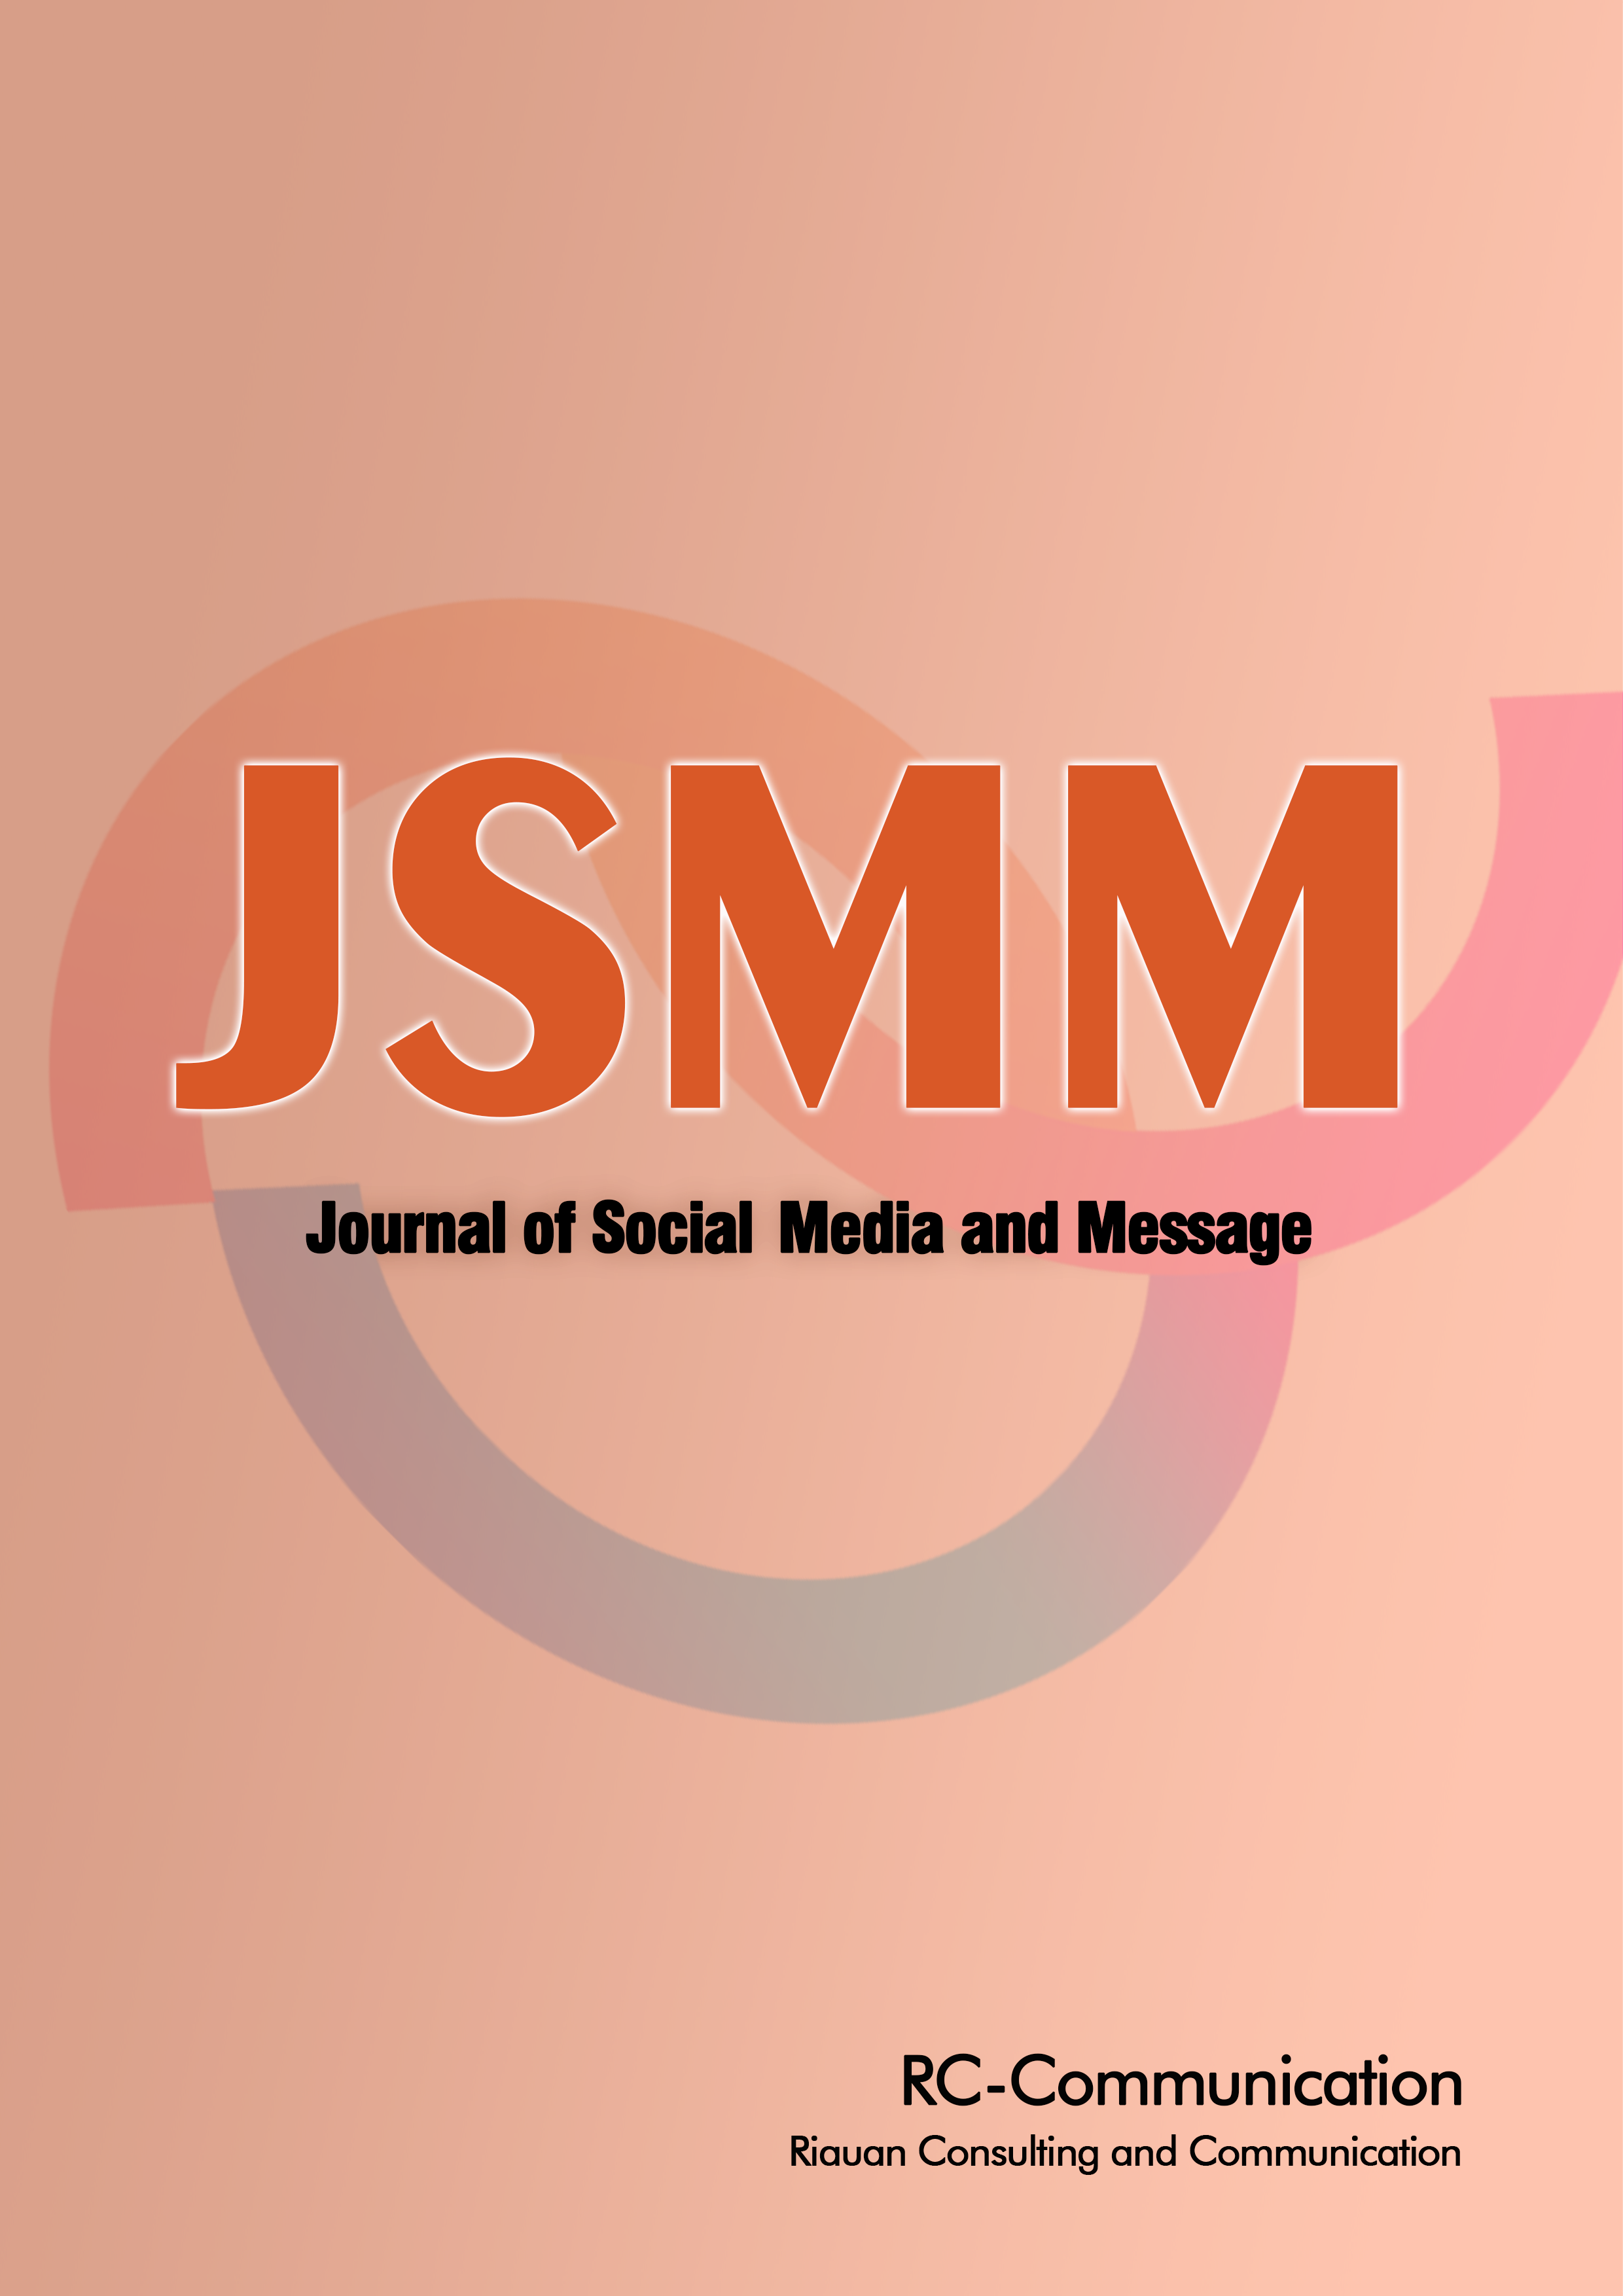 Journal of Social Media and Message